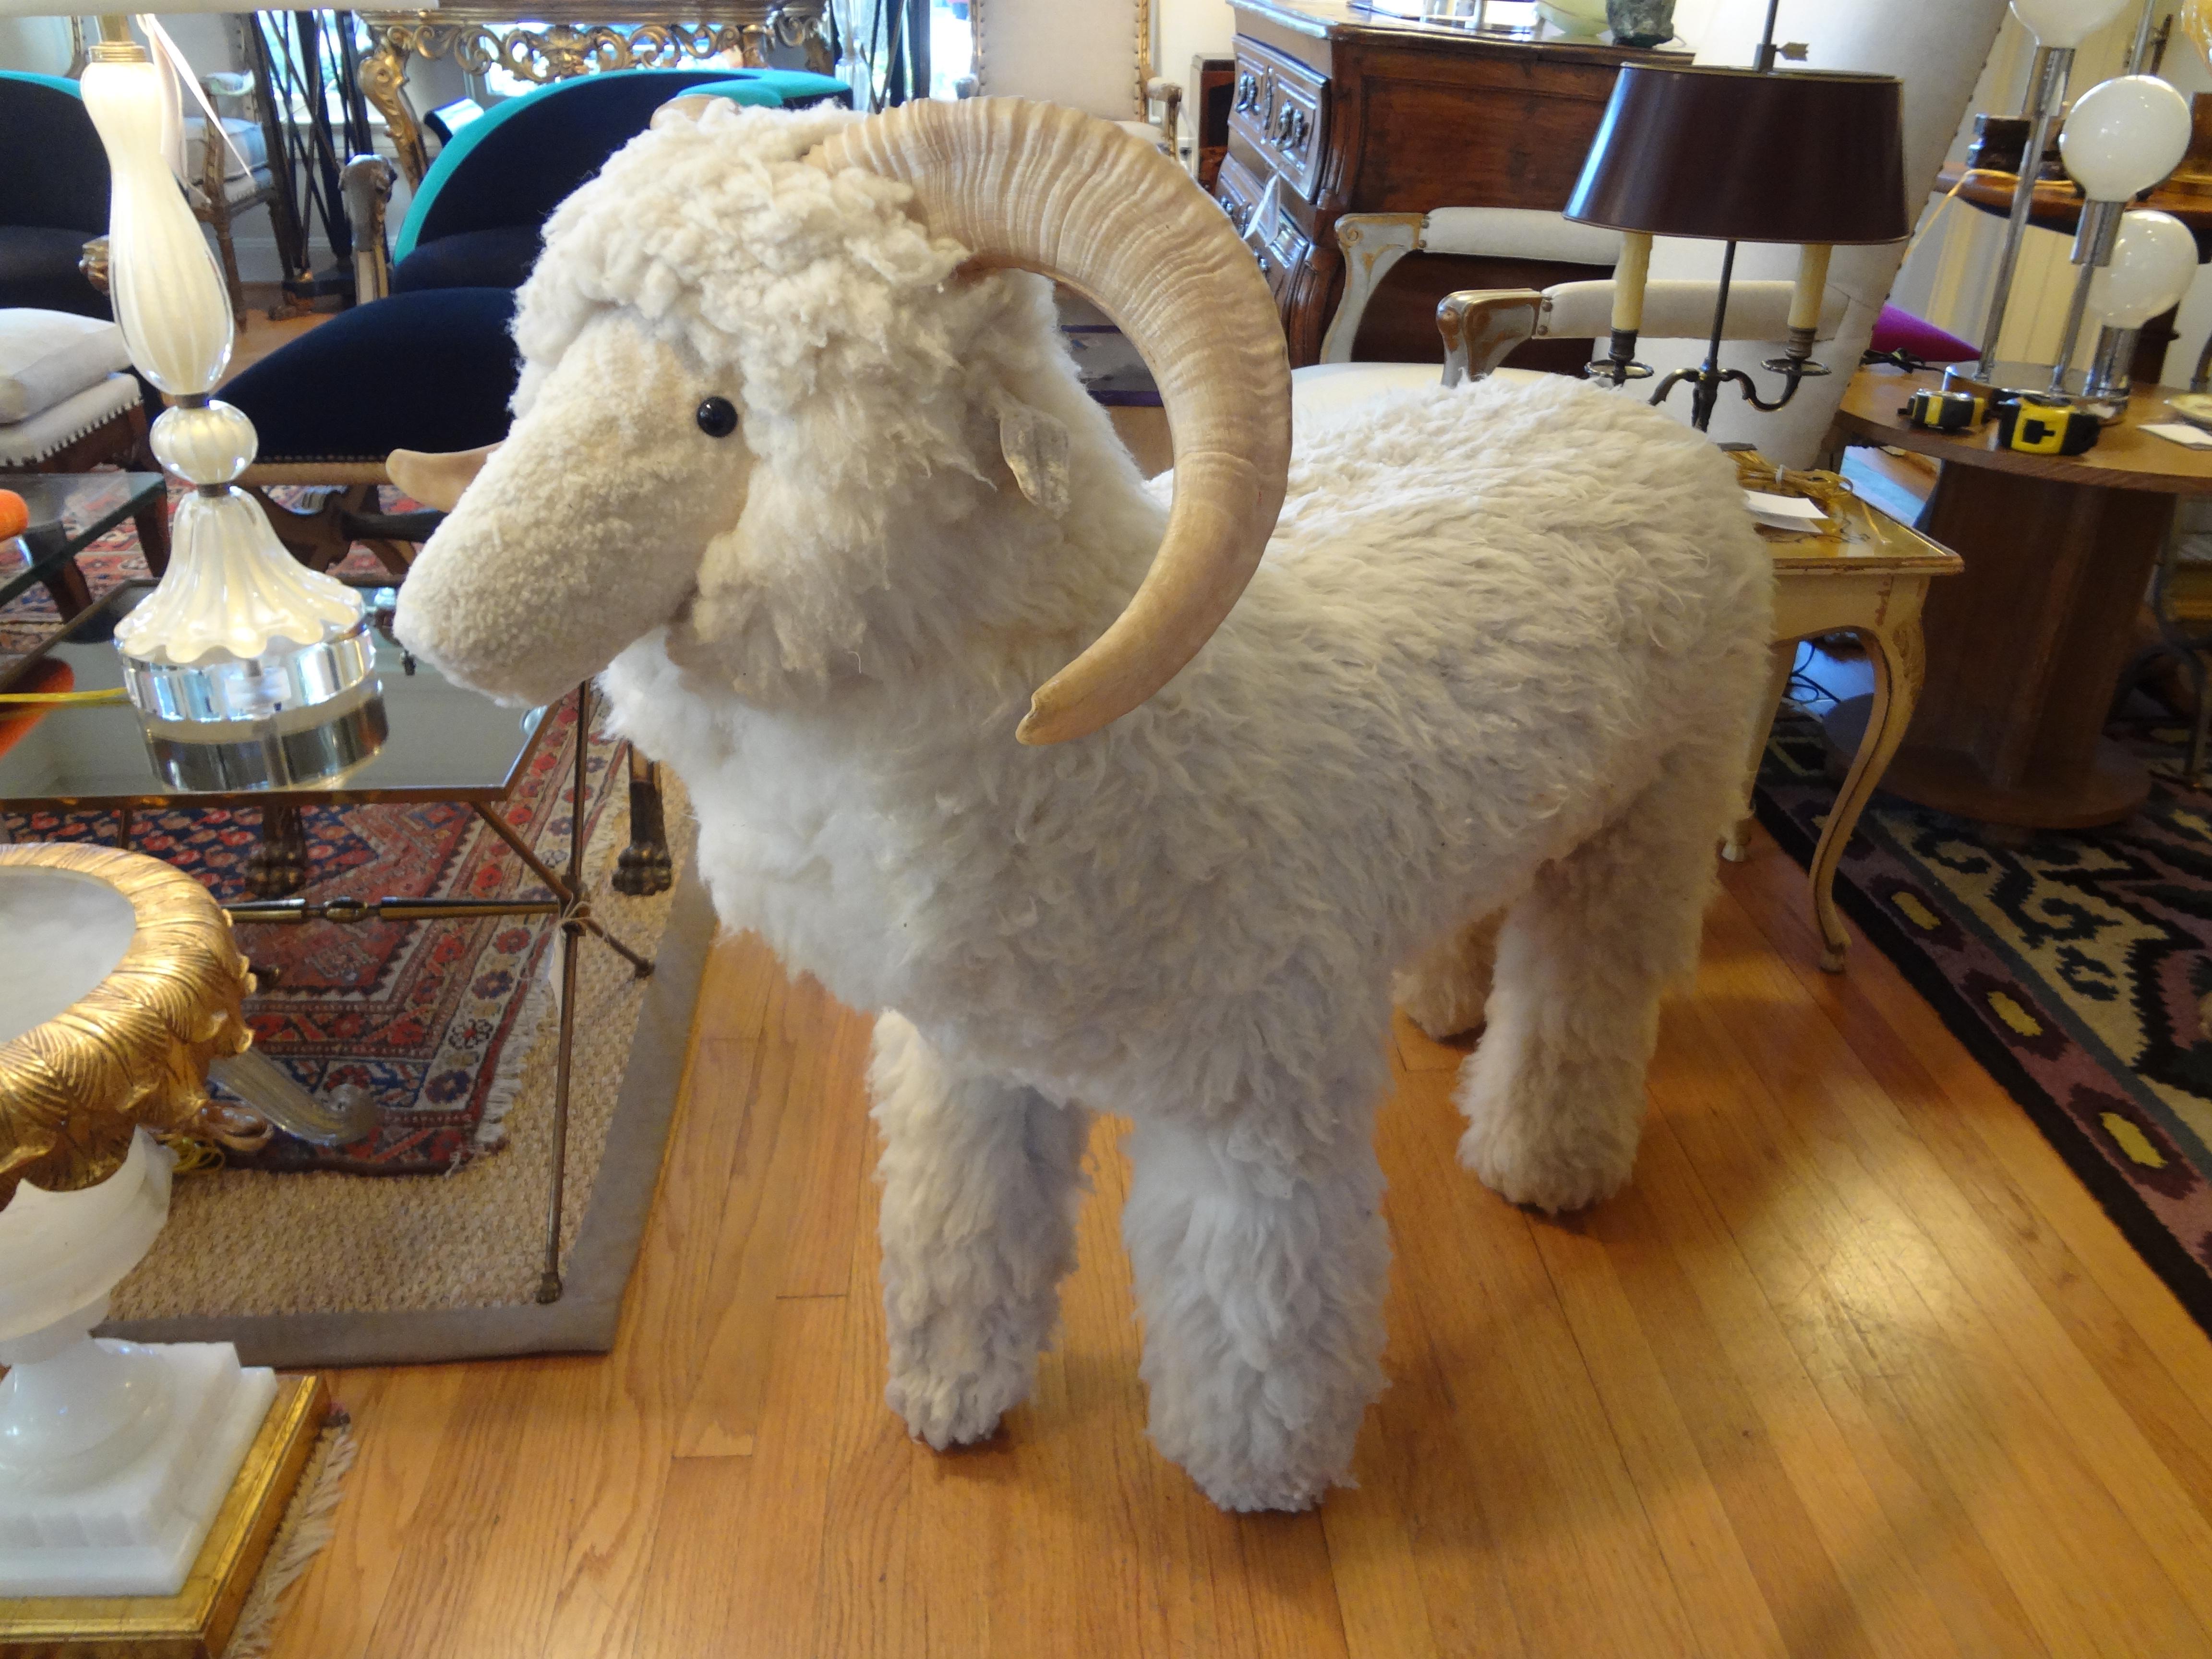 Large realistic sheep or lamb sculpture, bench or ottoman made of wood and covered with genuine shearling sheep fur and horns, circa 1967.
Dimensions: 36 inches high, 19 inches wide and 39 inches length.